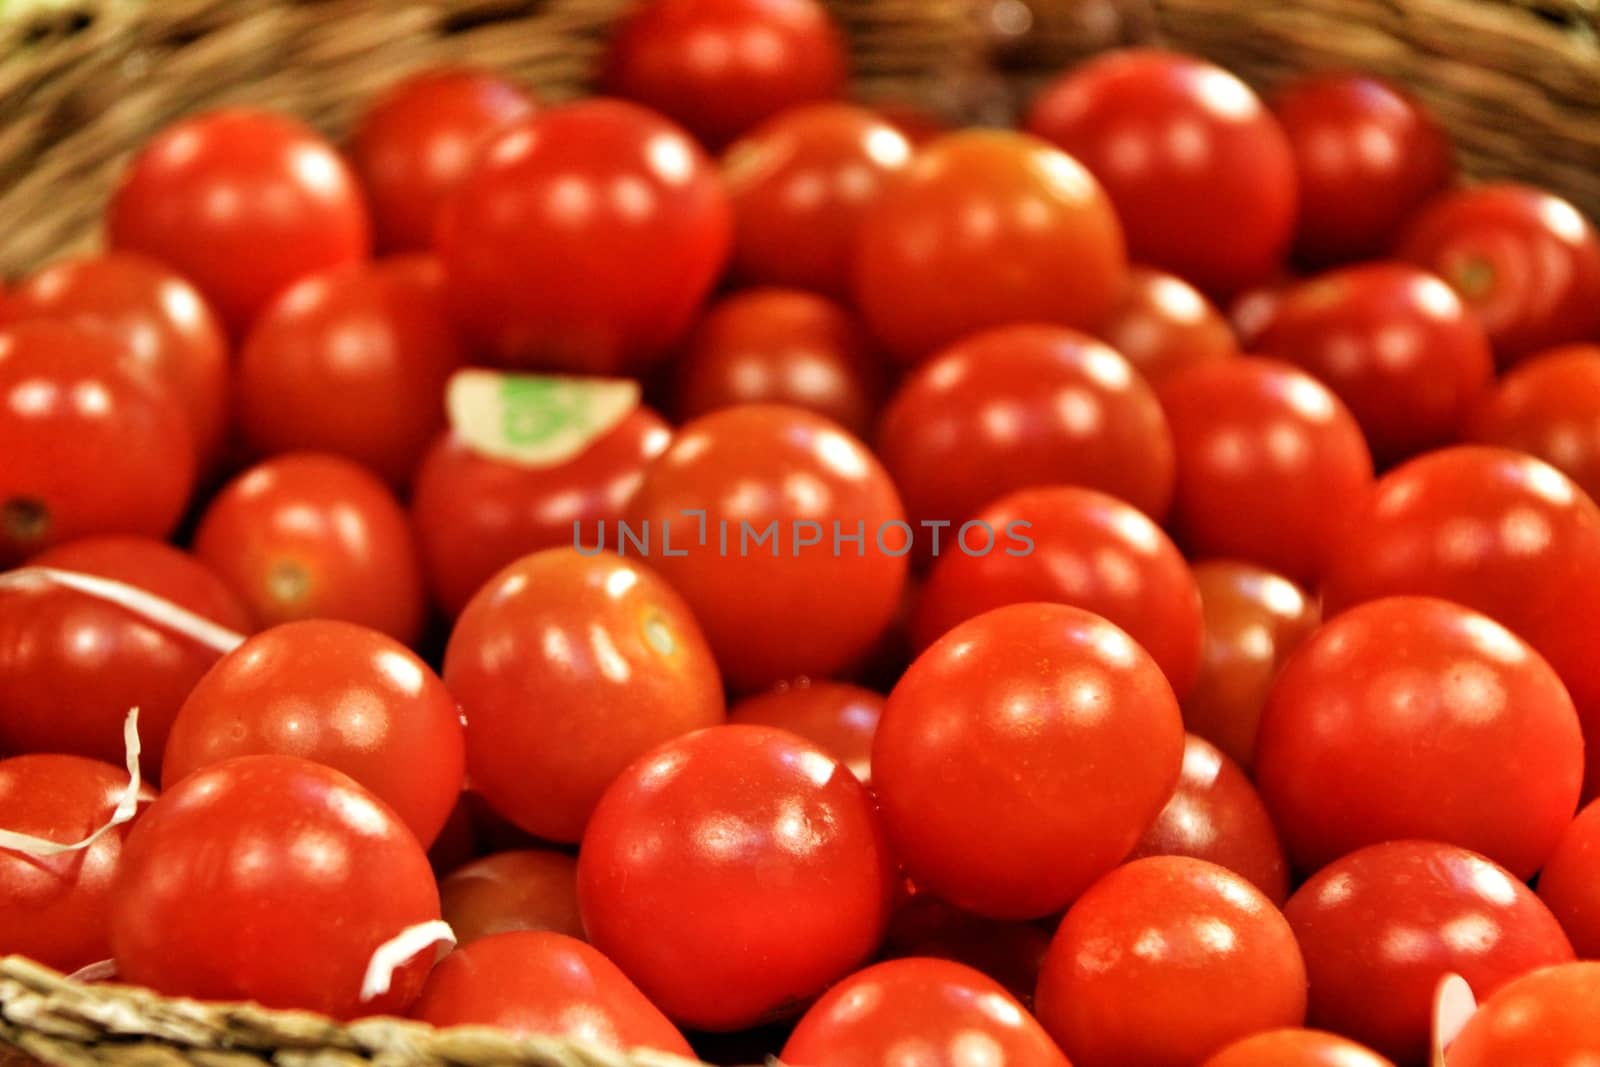 Tomatoes for sale at a farmer market stall in Spain